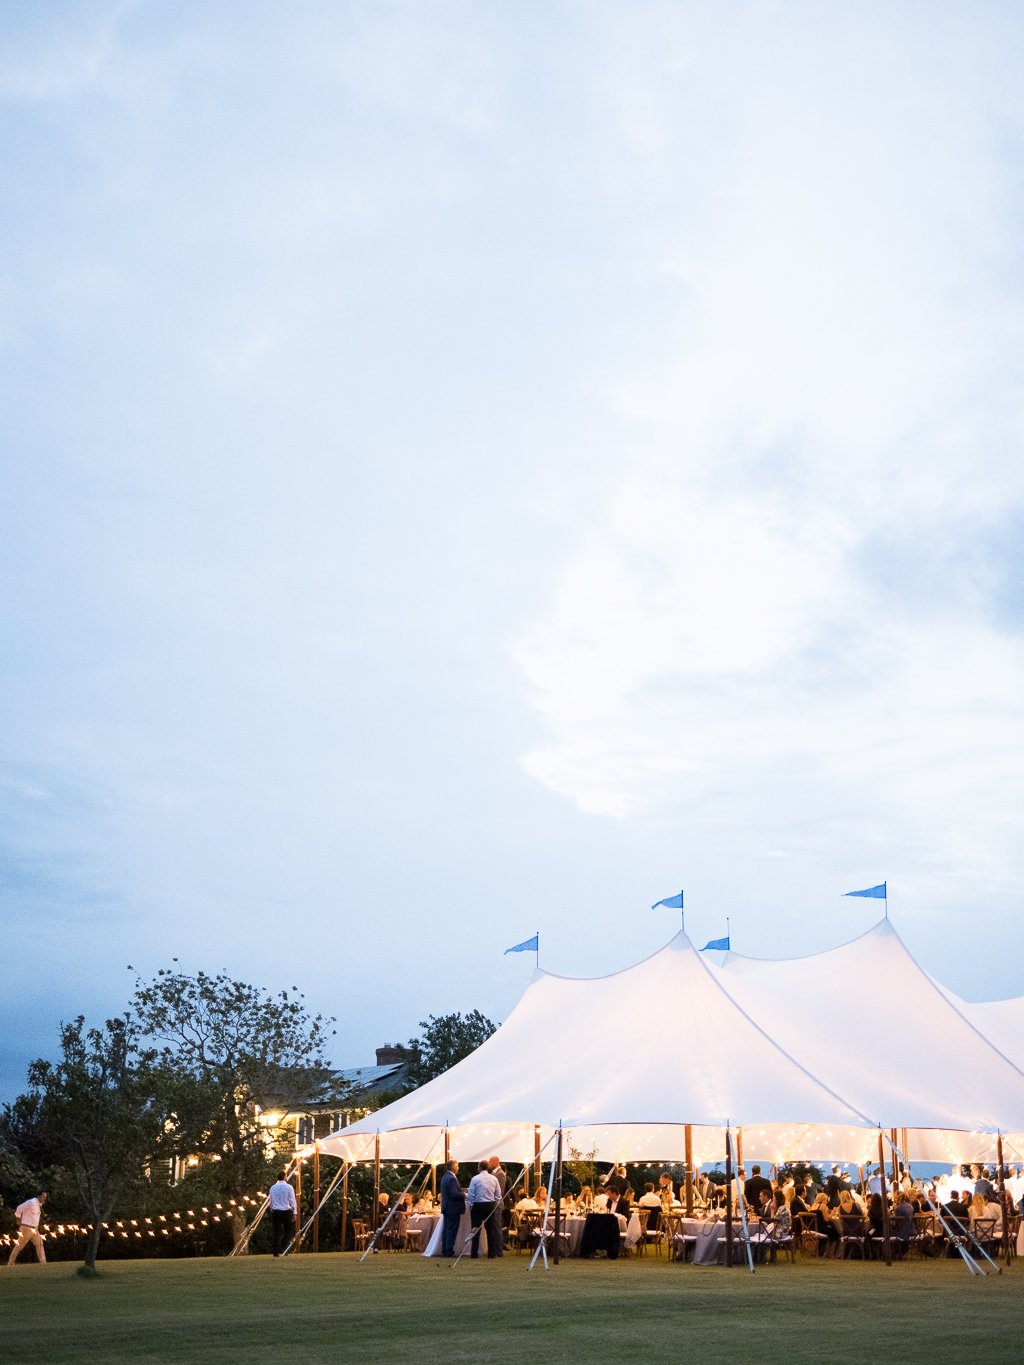 Sunset Photos of Tented Wedding in The Hamptons, Montauk NY